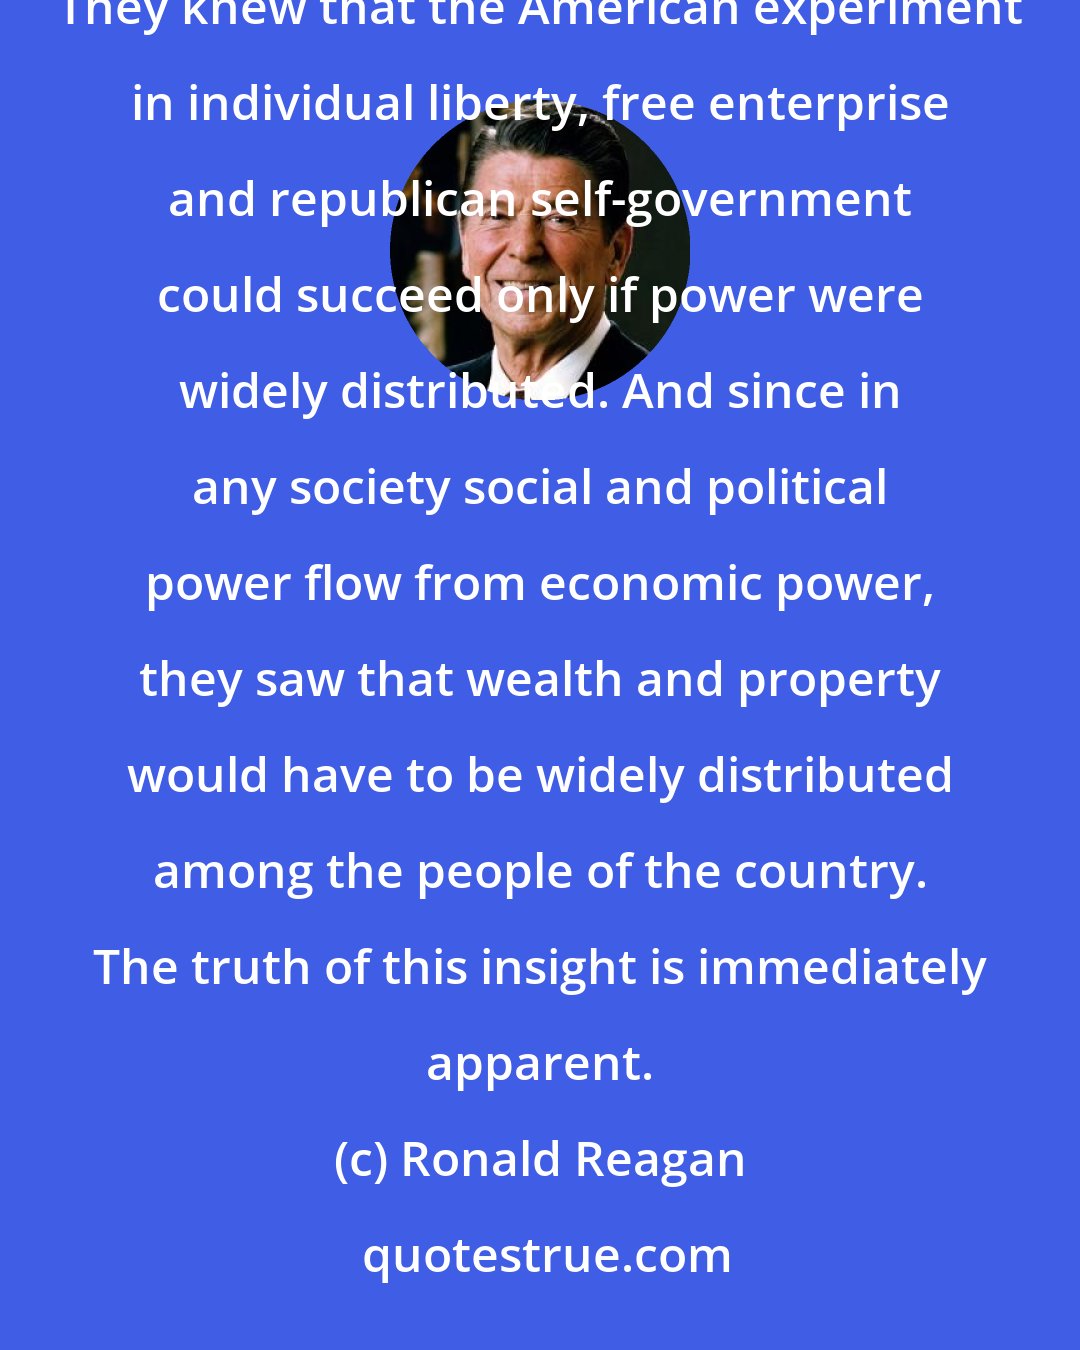 Ronald Reagan: Our Founding Fathers well understood that concentrated power is the enemy of liberty and the rights of man. They knew that the American experiment in individual liberty, free enterprise and republican self-government could succeed only if power were widely distributed. And since in any society social and political power flow from economic power, they saw that wealth and property would have to be widely distributed among the people of the country. The truth of this insight is immediately apparent.